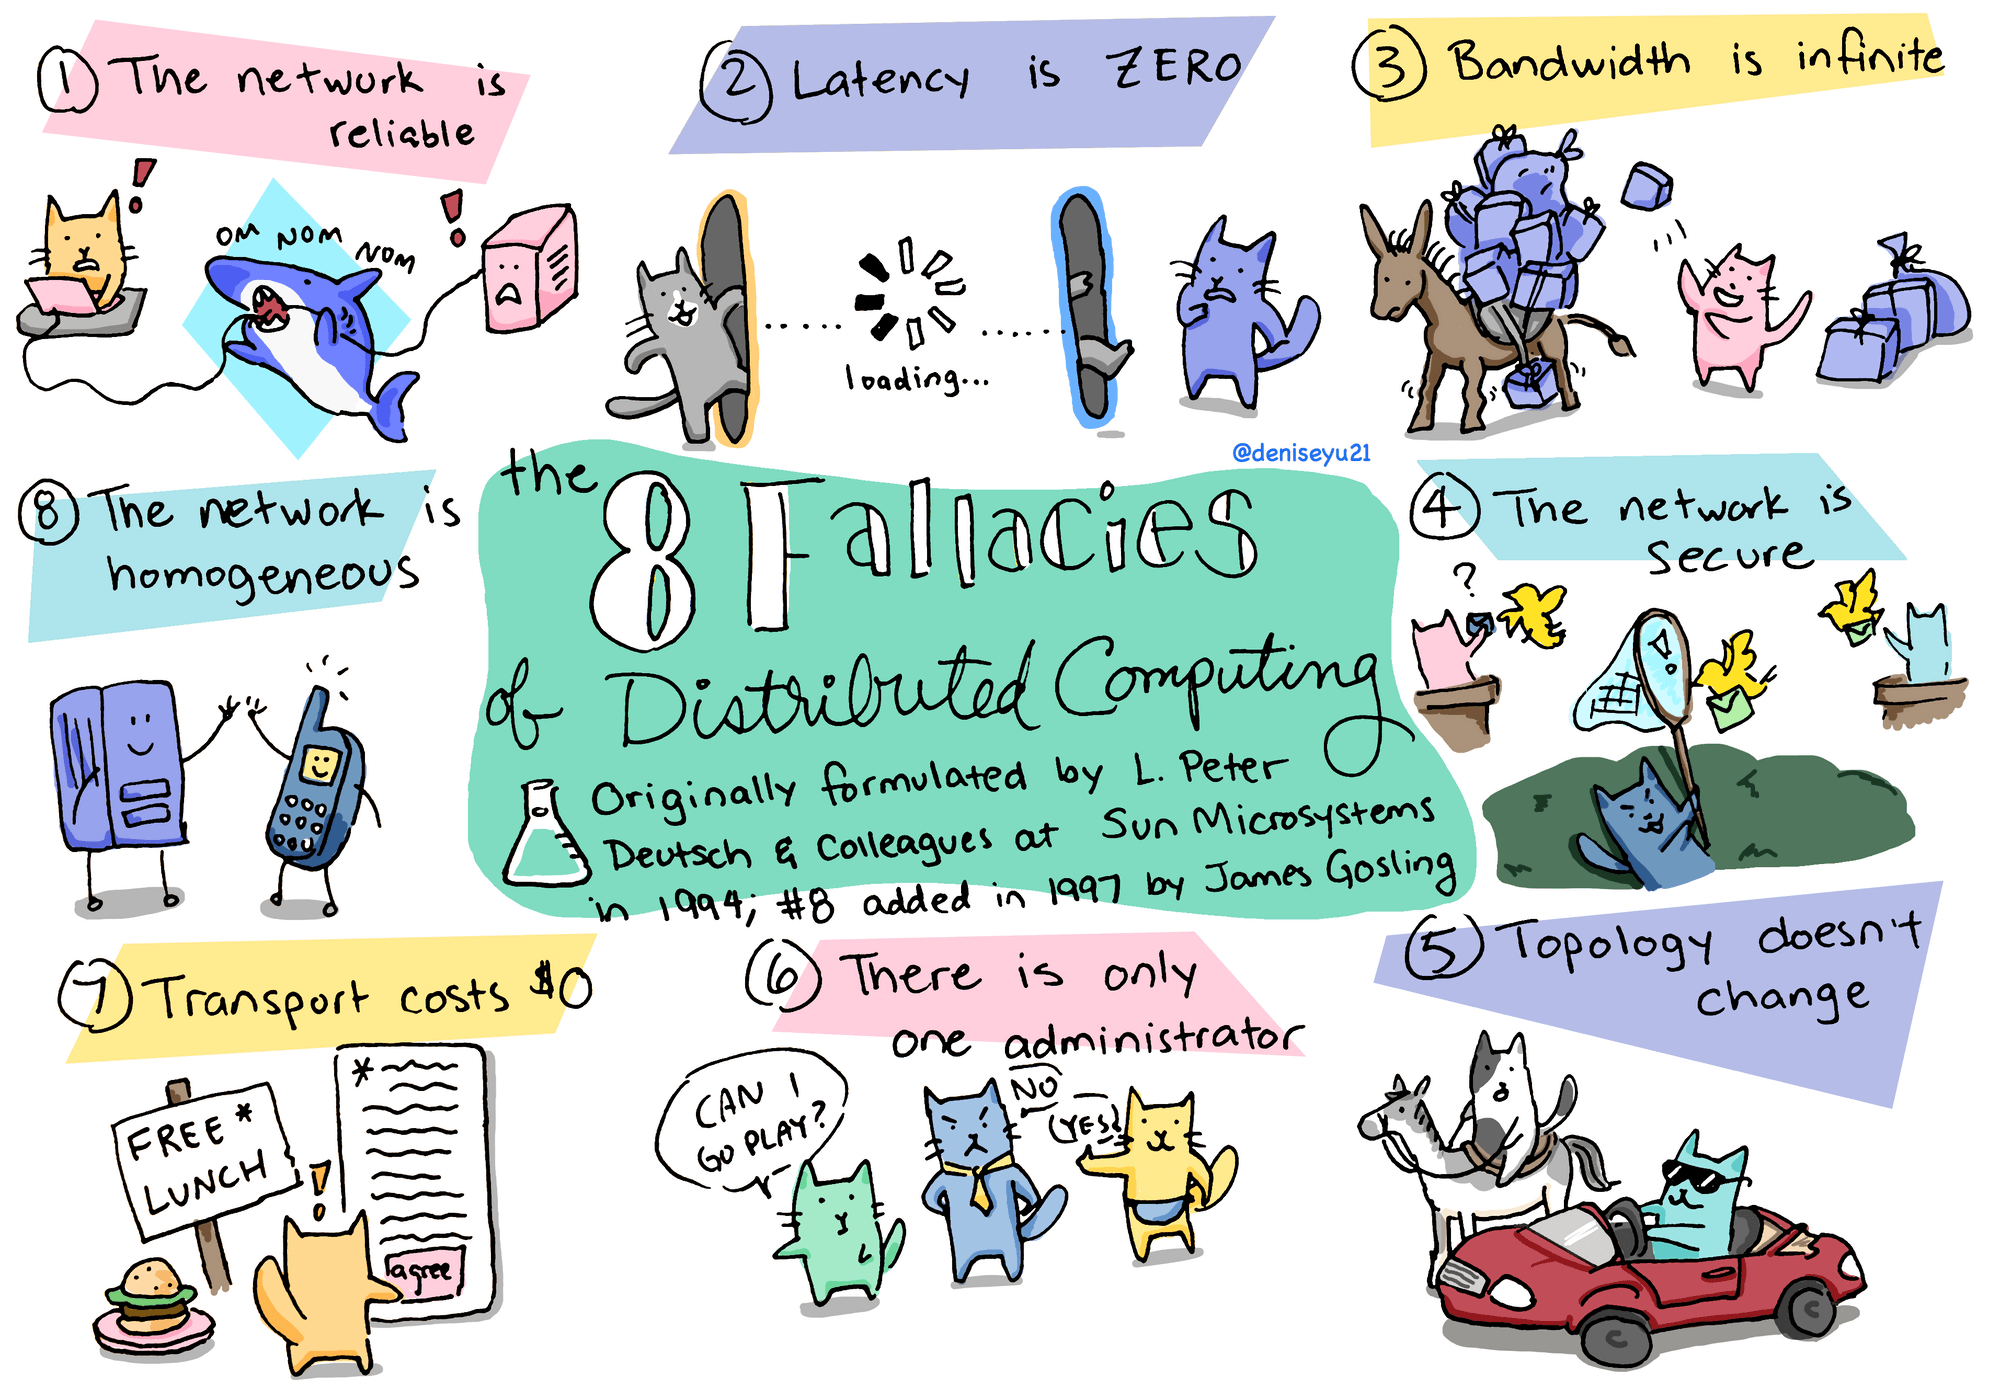 Visual representation of the 8 fallacies of distributed computing, by Denise Yu.